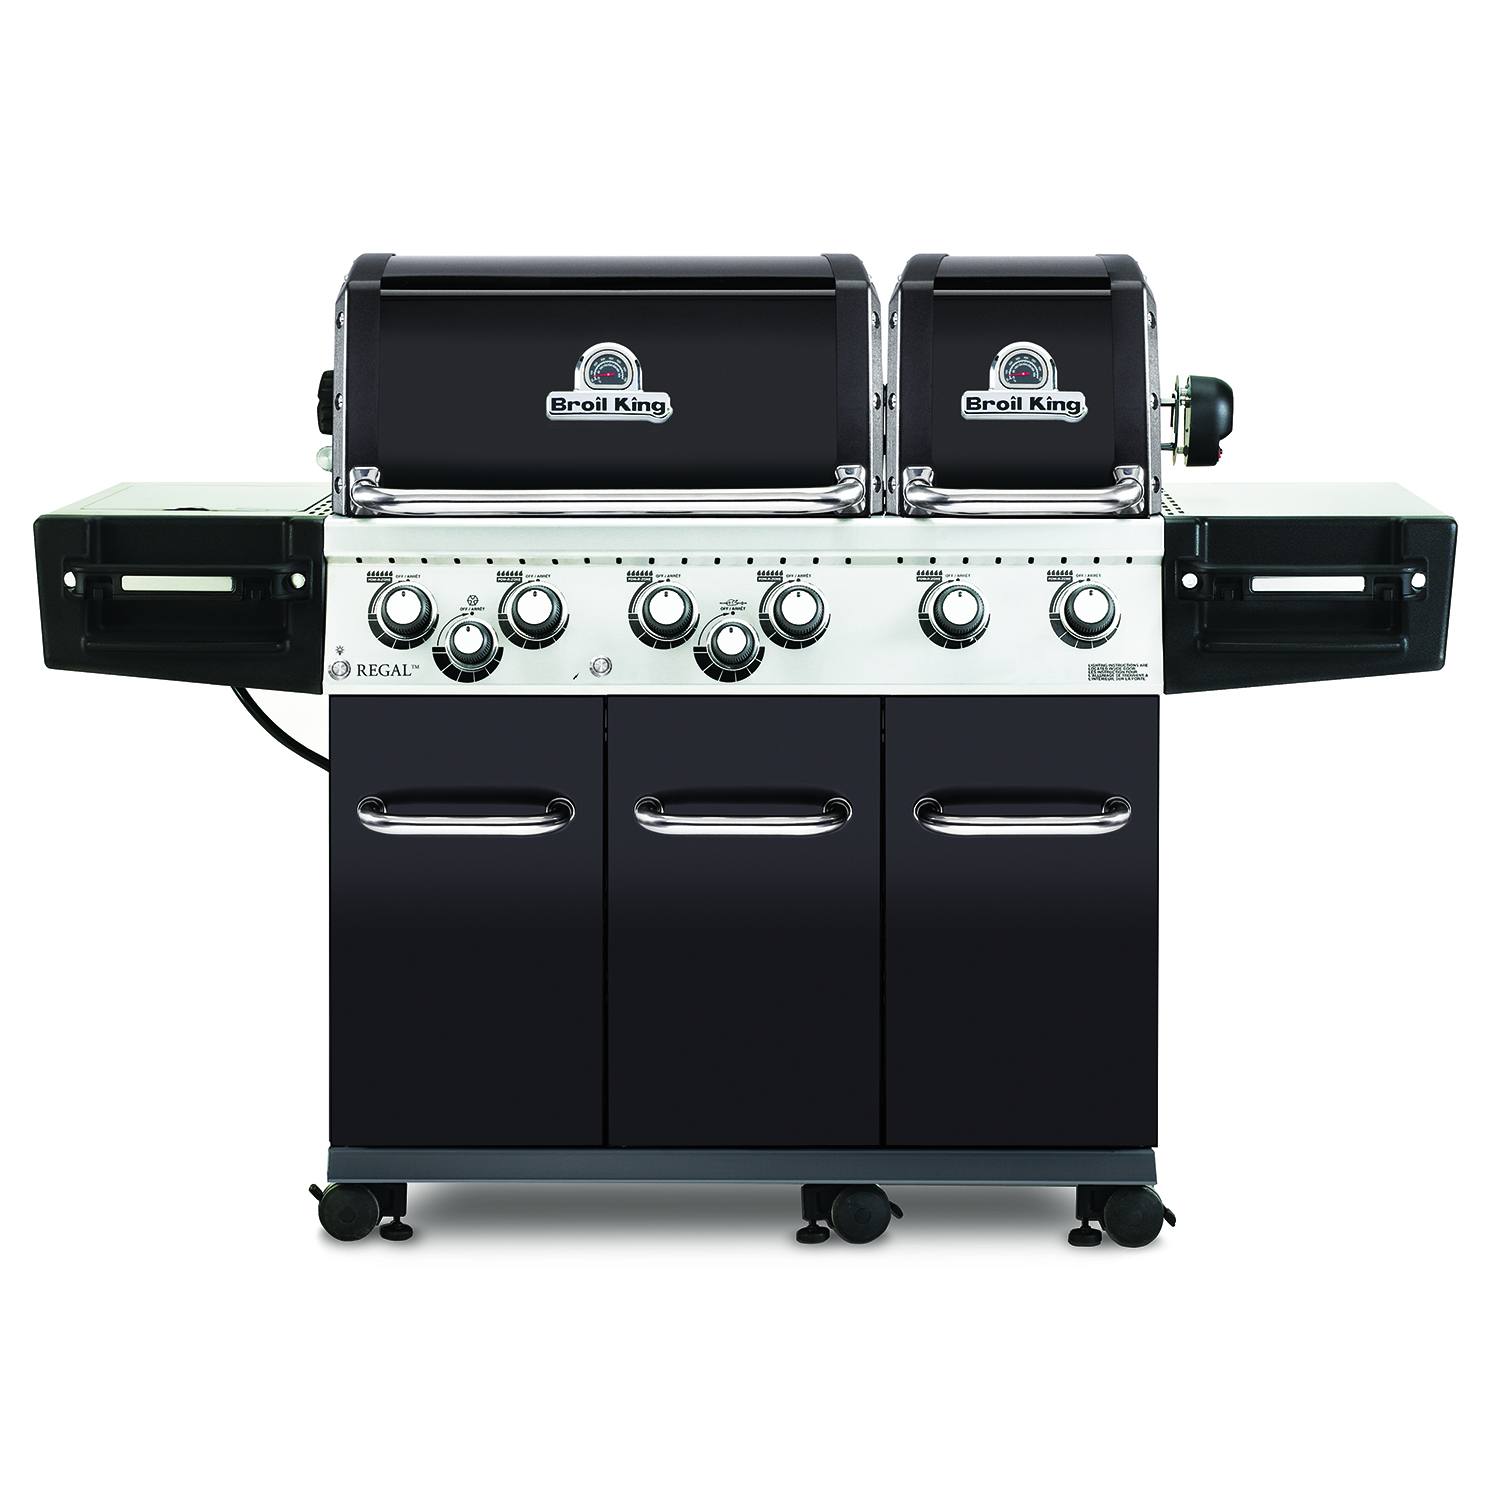 Picture of Broil King Regal 690 Black Gasgrill (997283)